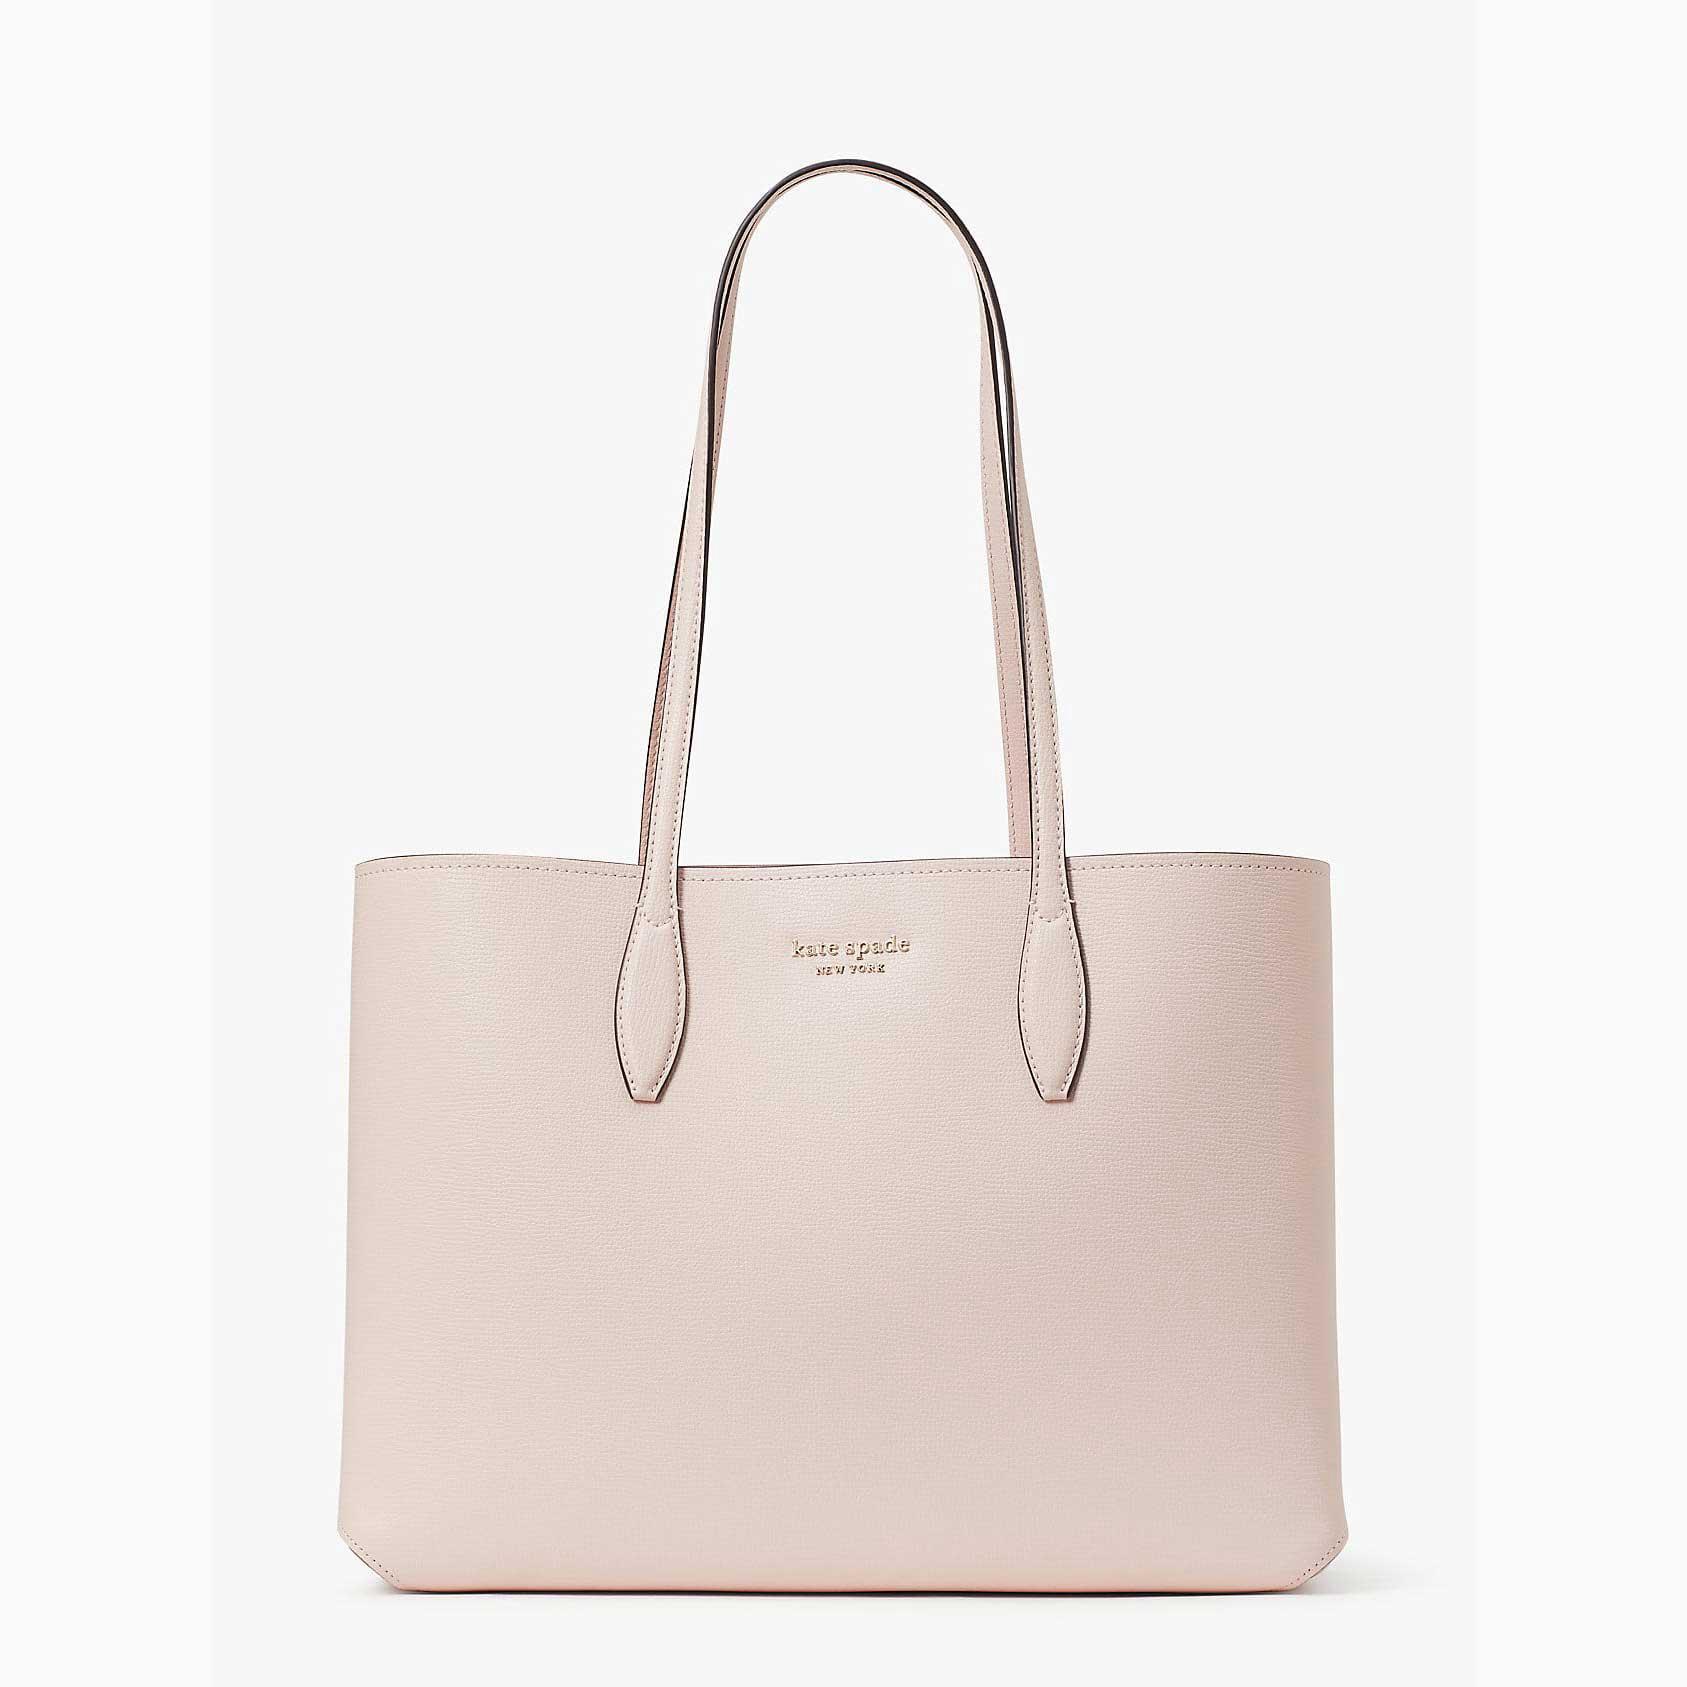 Any experience buying from Kate Spade PH outlet website? Is it